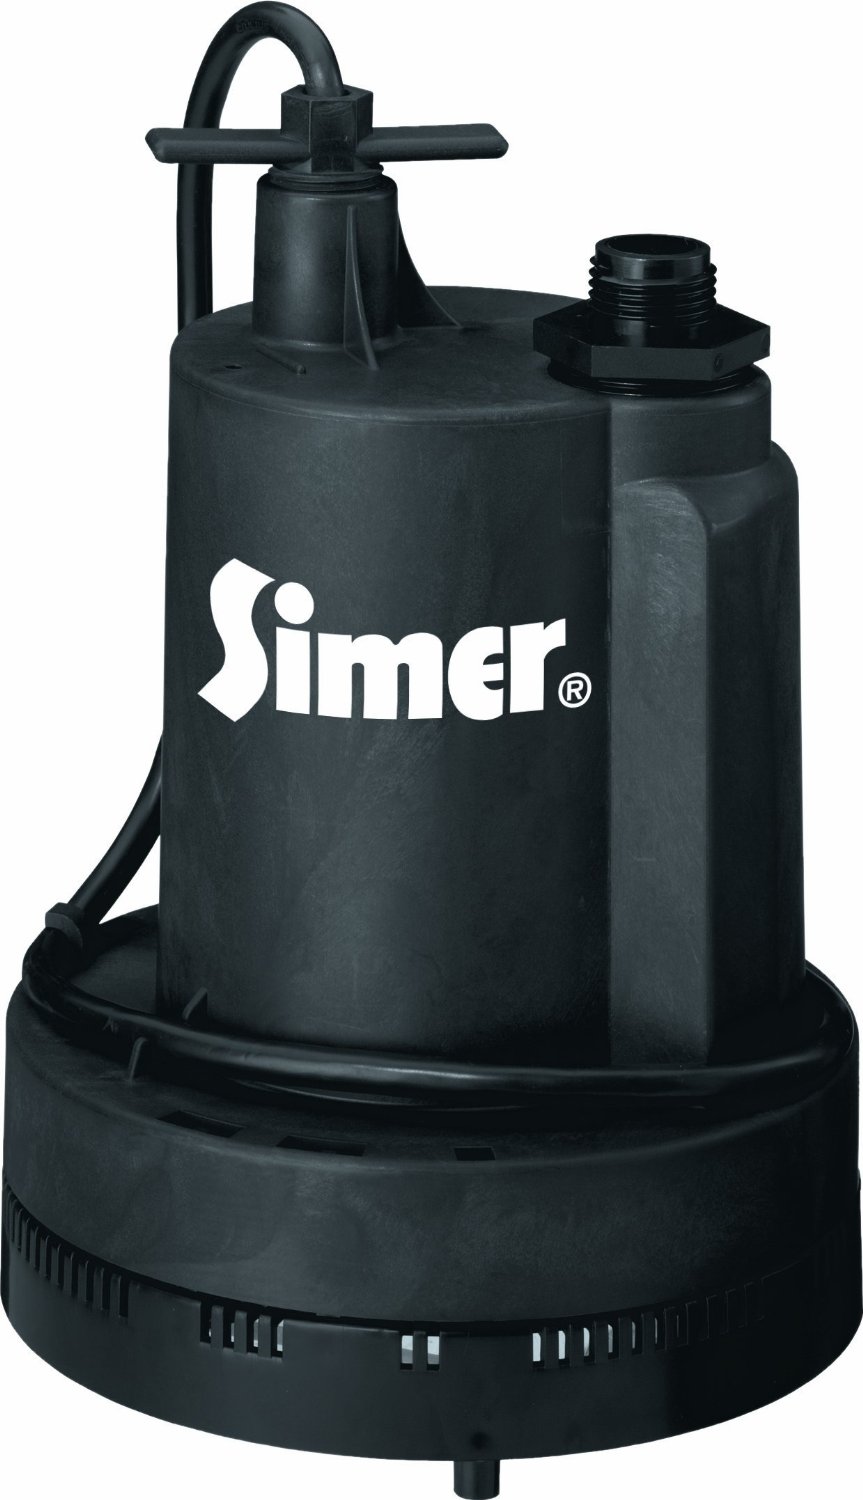 submersible simer sump geyser 2305 thermoplastic a252 gph impeller m40p shinypiece overload